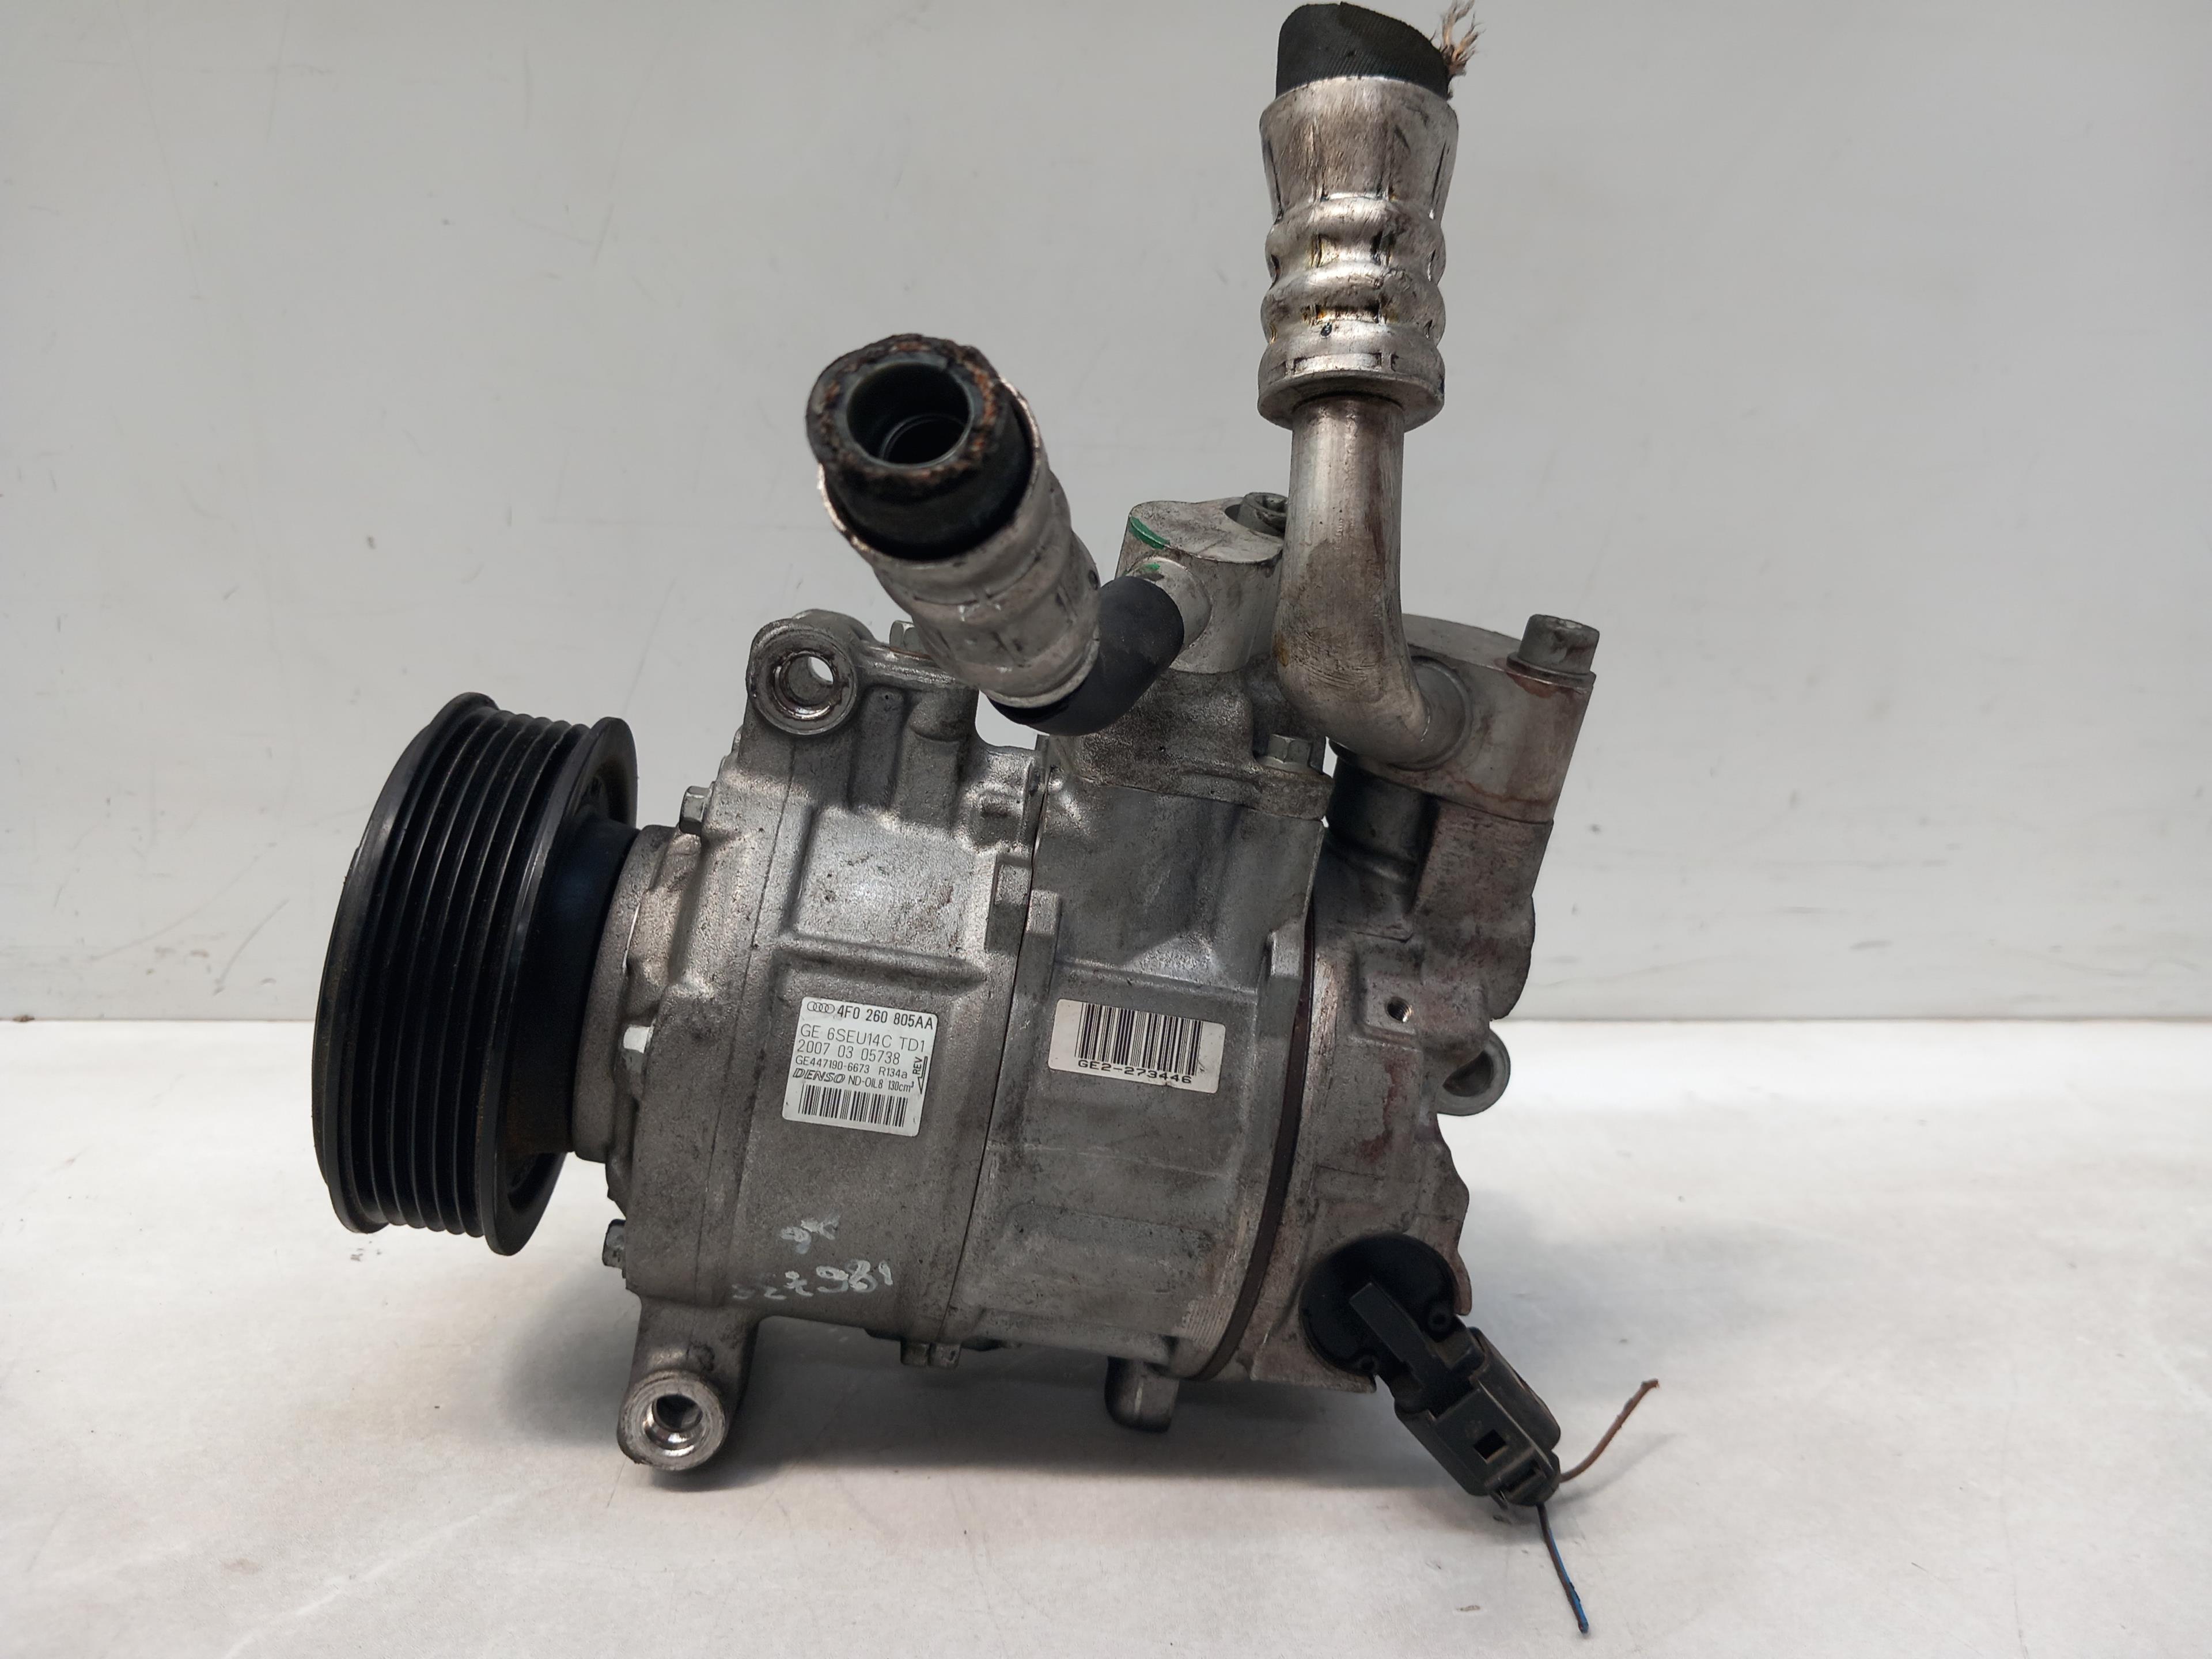 AUDI A6 C6/4F (2004-2011) Air Condition Pump 4F0260805AA, GE4471906673 24463473